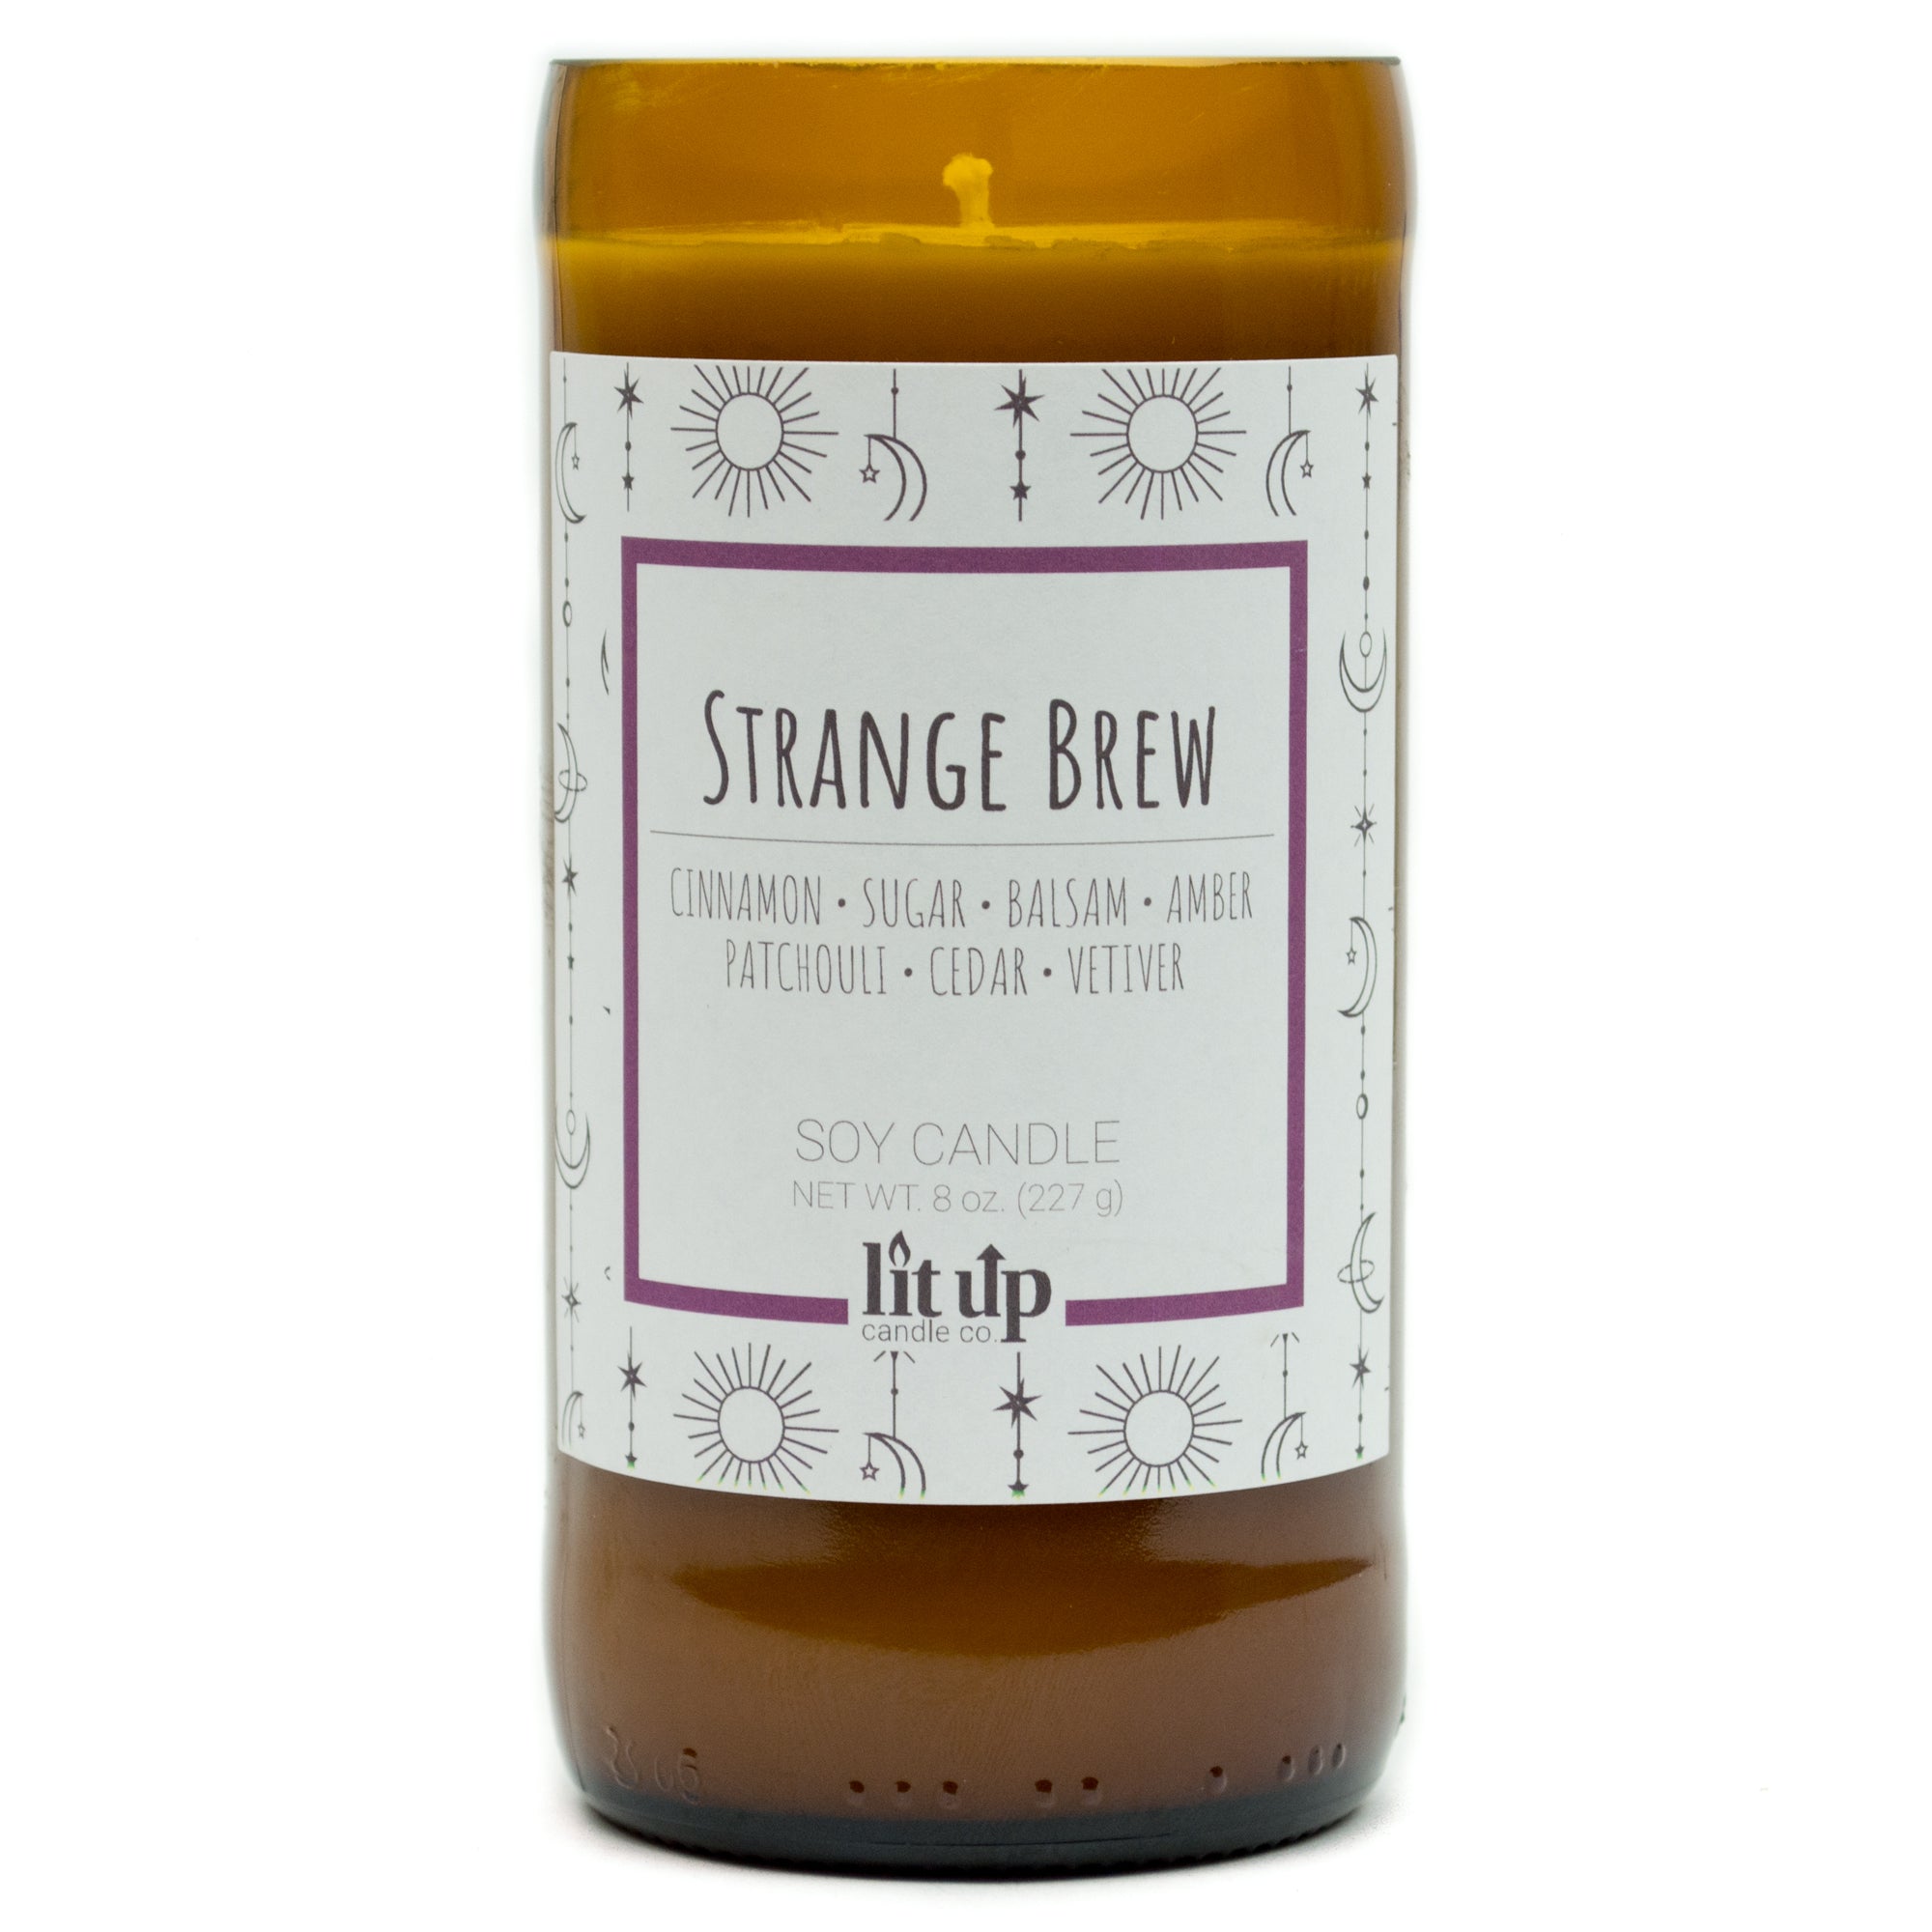 Strange Brew scented 8 oz. soy candle in upcycled beer bottle - FKA Witches Brew